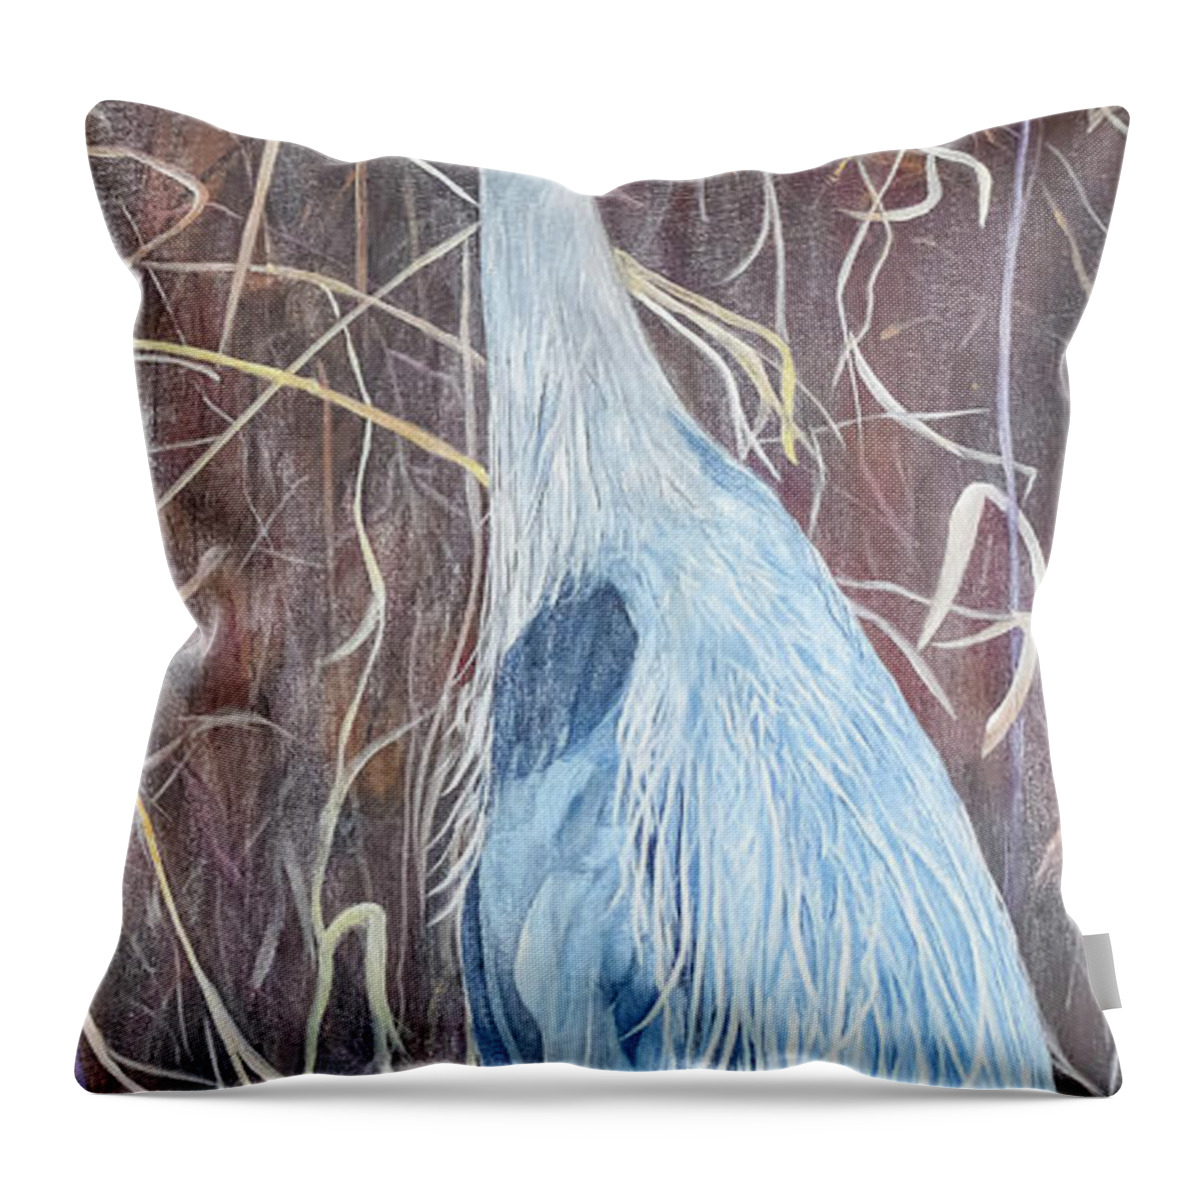 Blue Heron Throw Pillow featuring the painting Great Blue Heron by Marilyn McNish